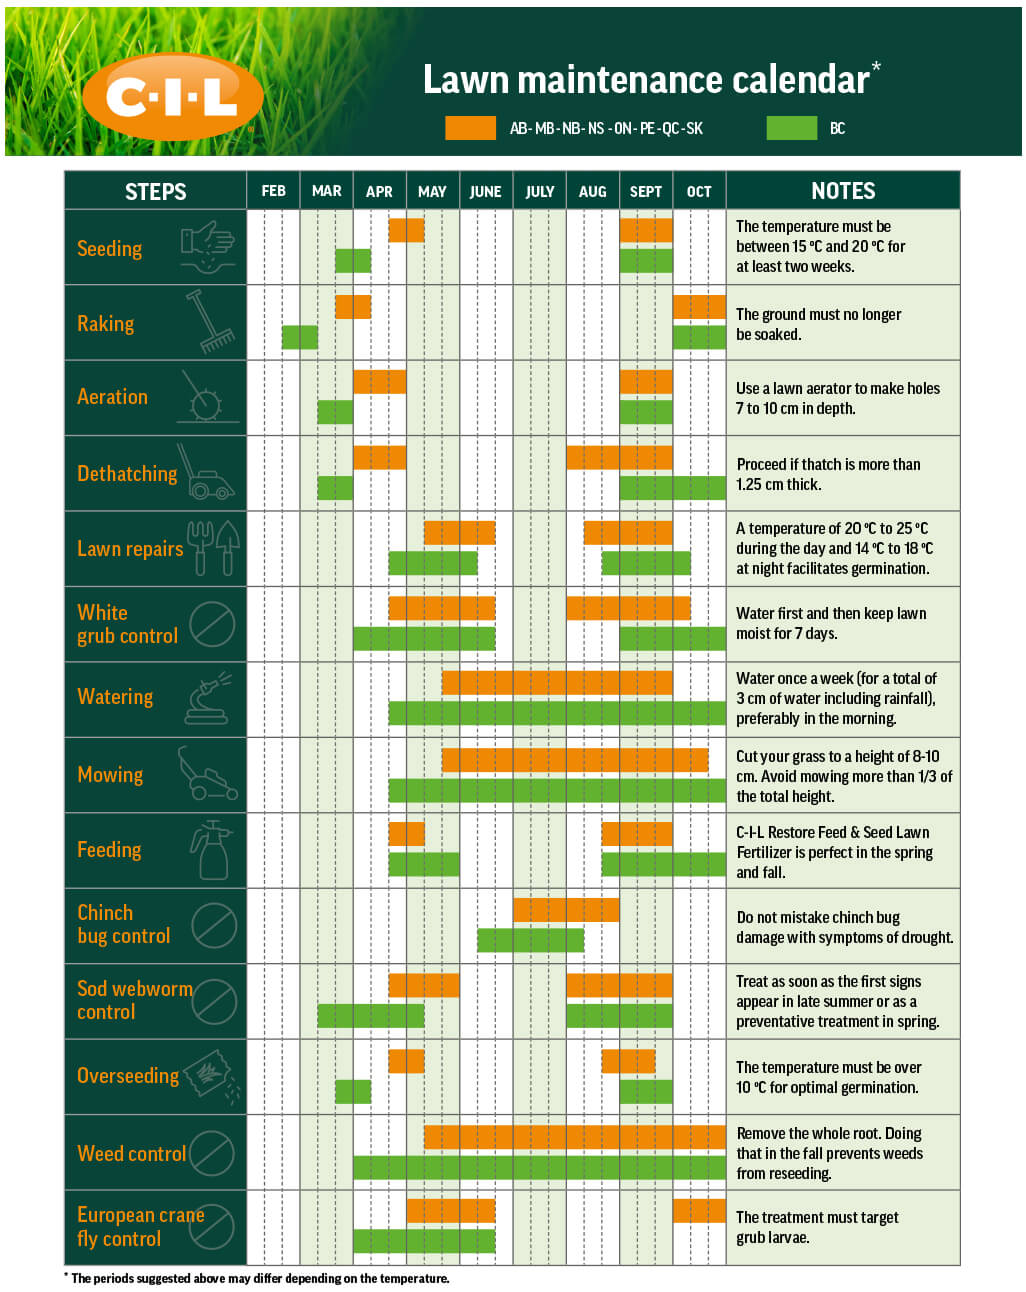 Lawn maintenance calendar for Canadian gardeners and homeowners.